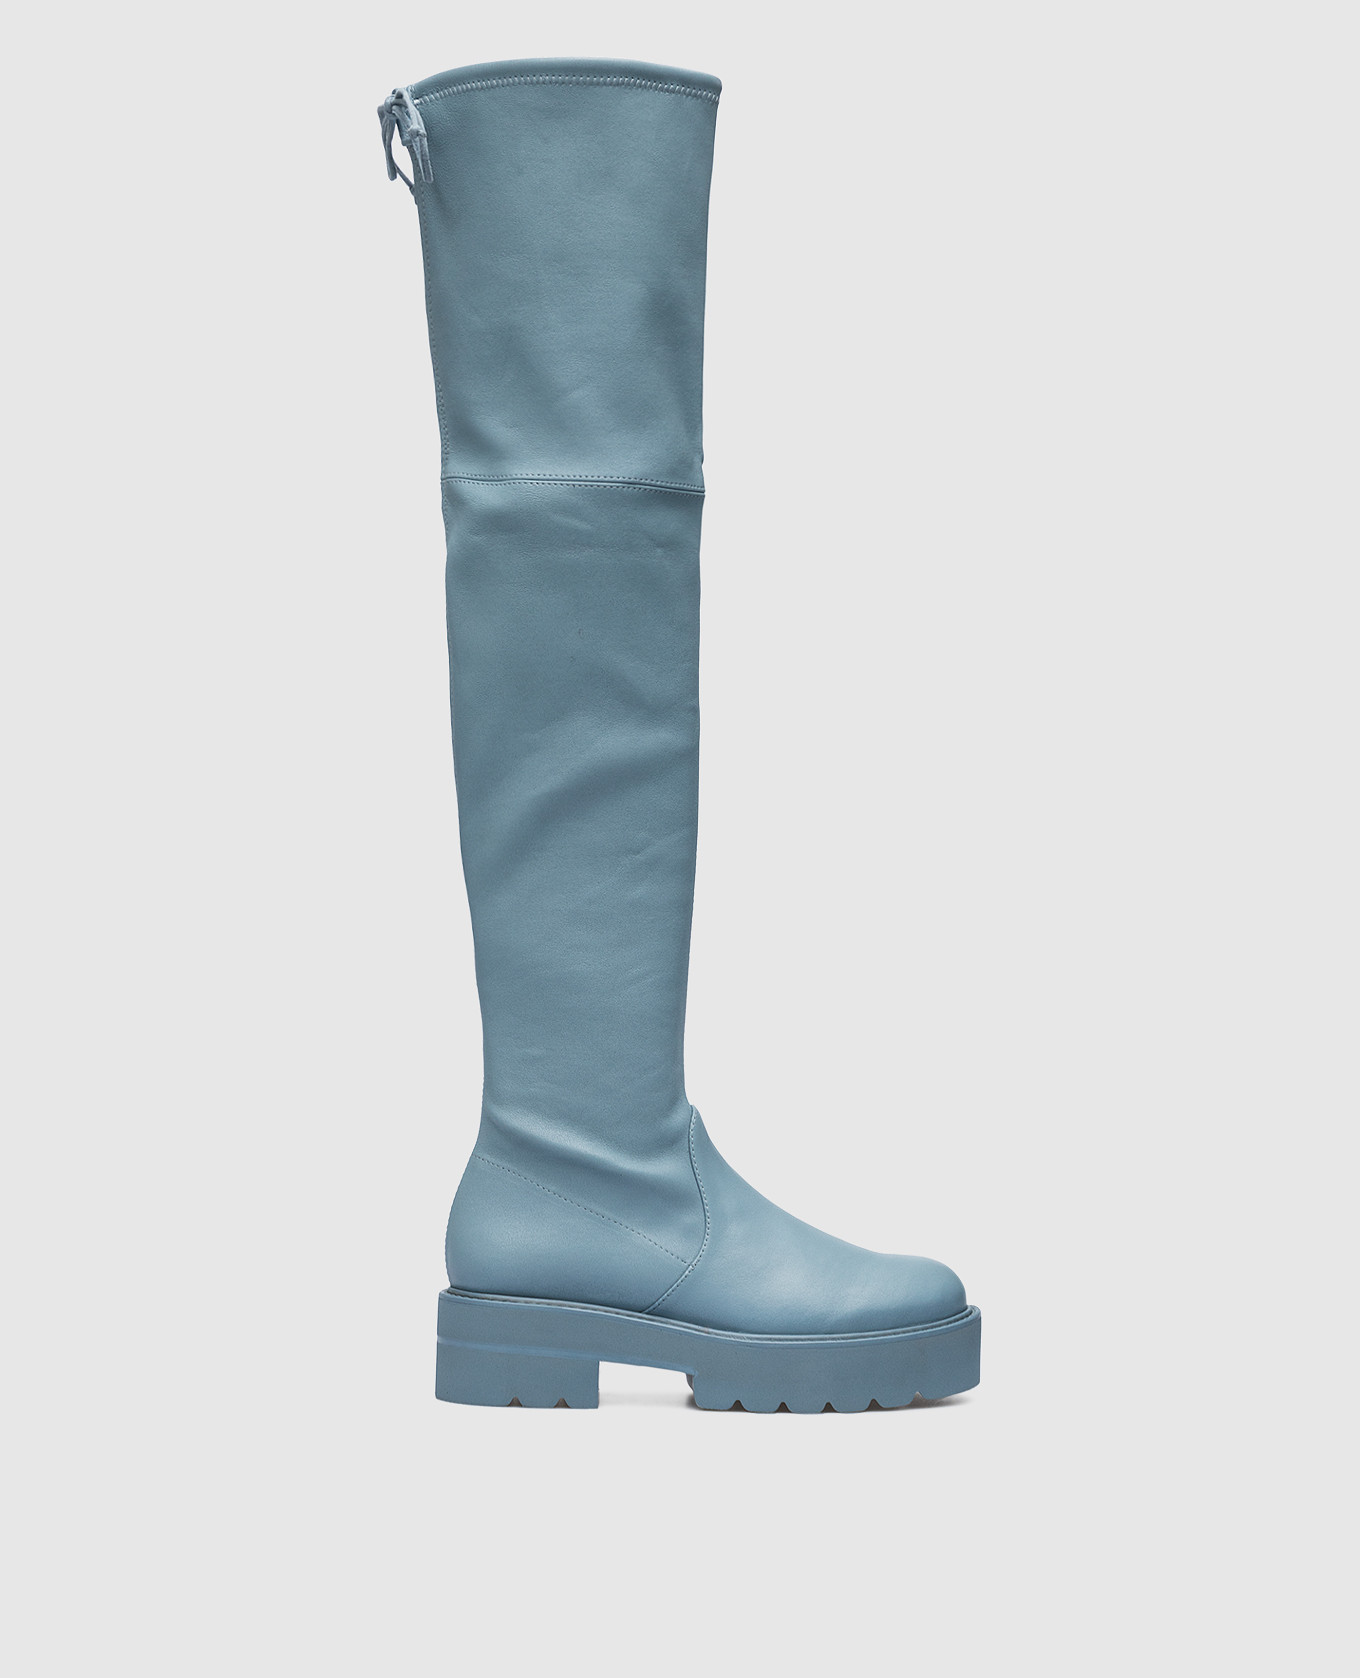 Lowland Ultralift blue leather boots